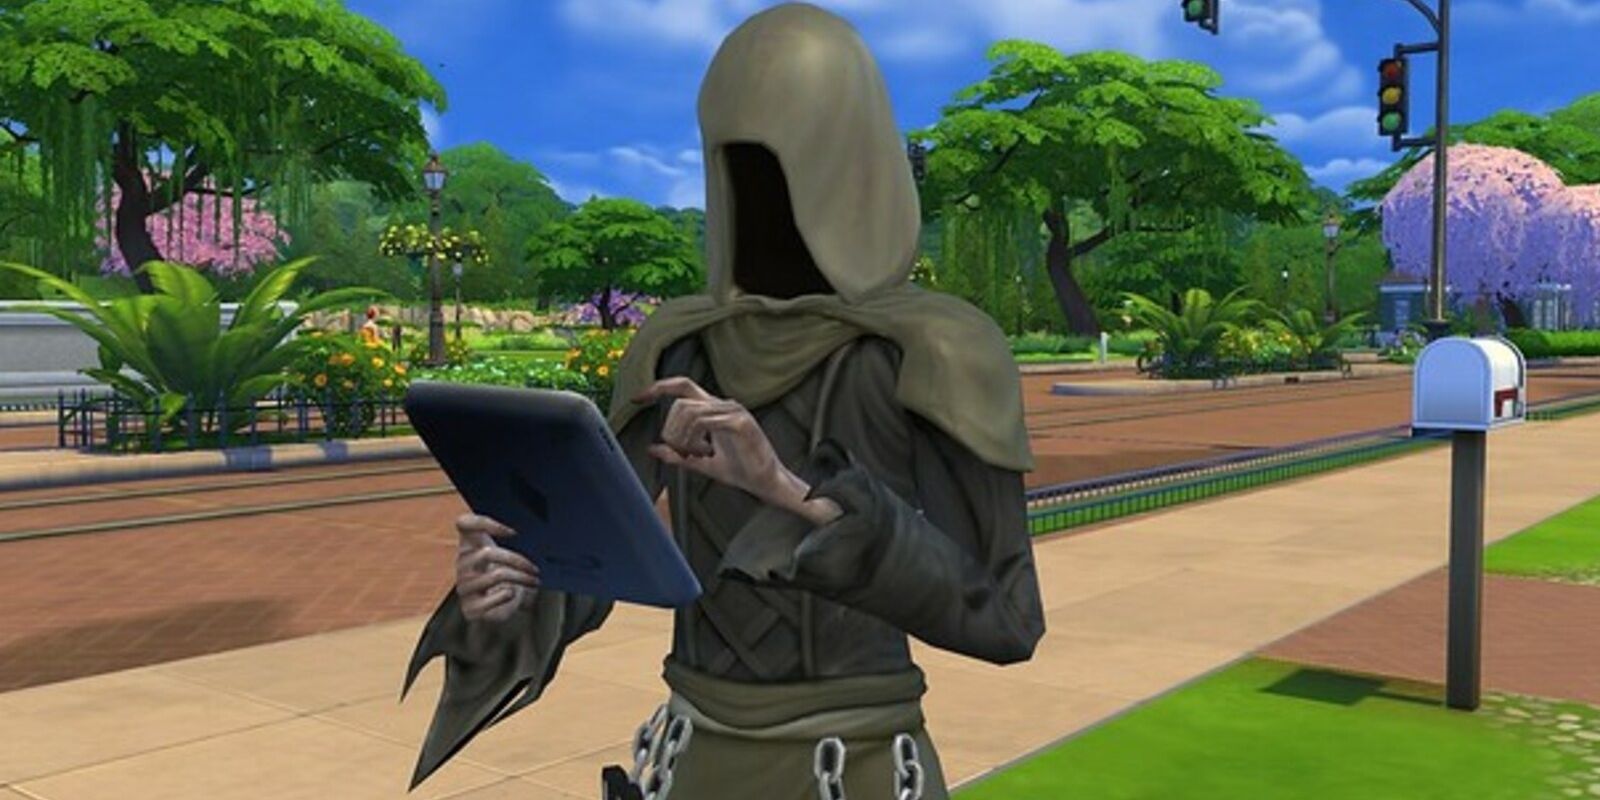 The Grim Reaper using a handheld device outdoors in The Sims 4